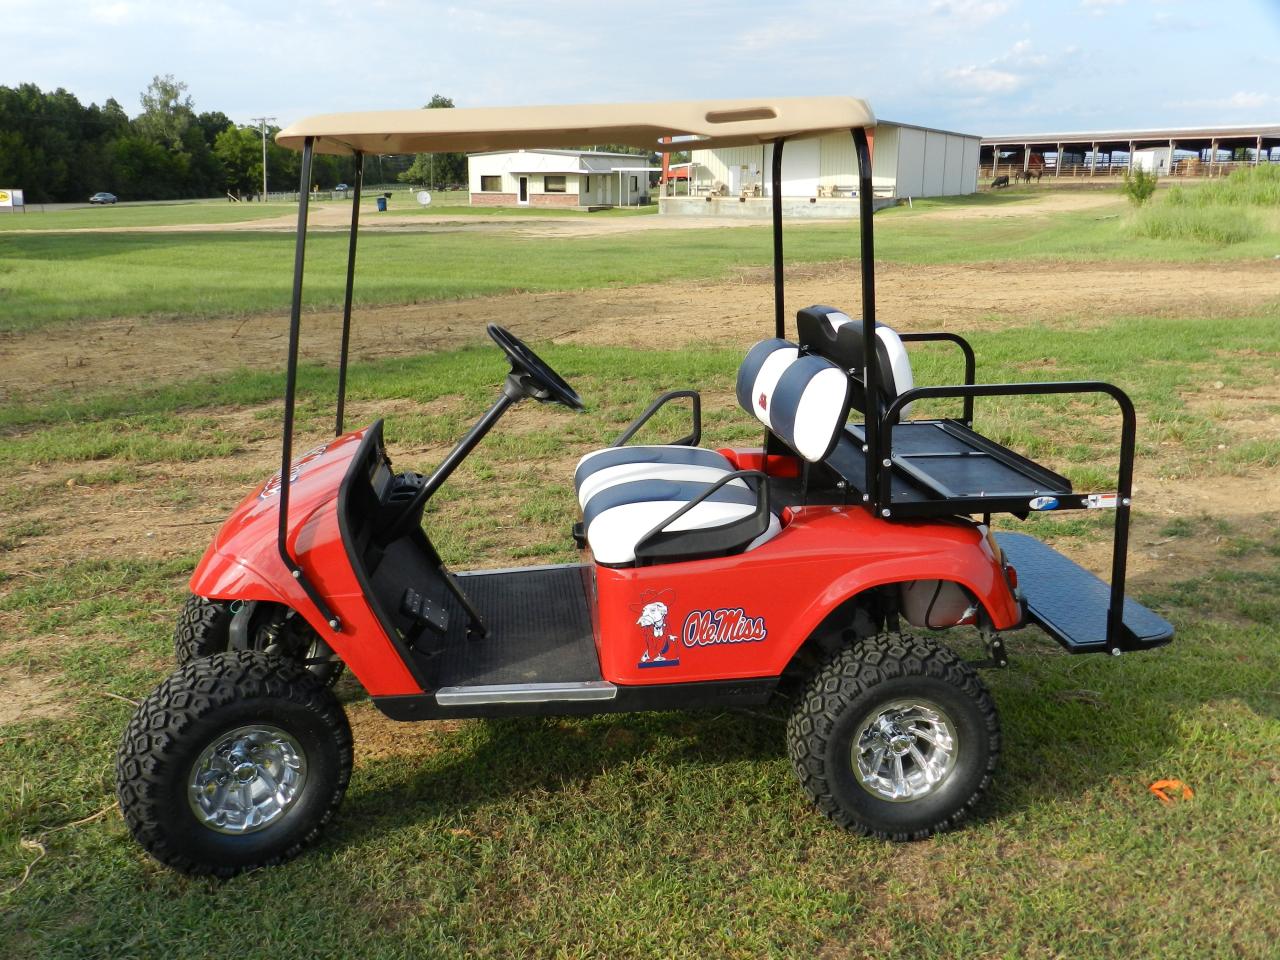 Used Golf Carts for Sale by Owner in Jackson, West Virginia: A Comprehensive Guide